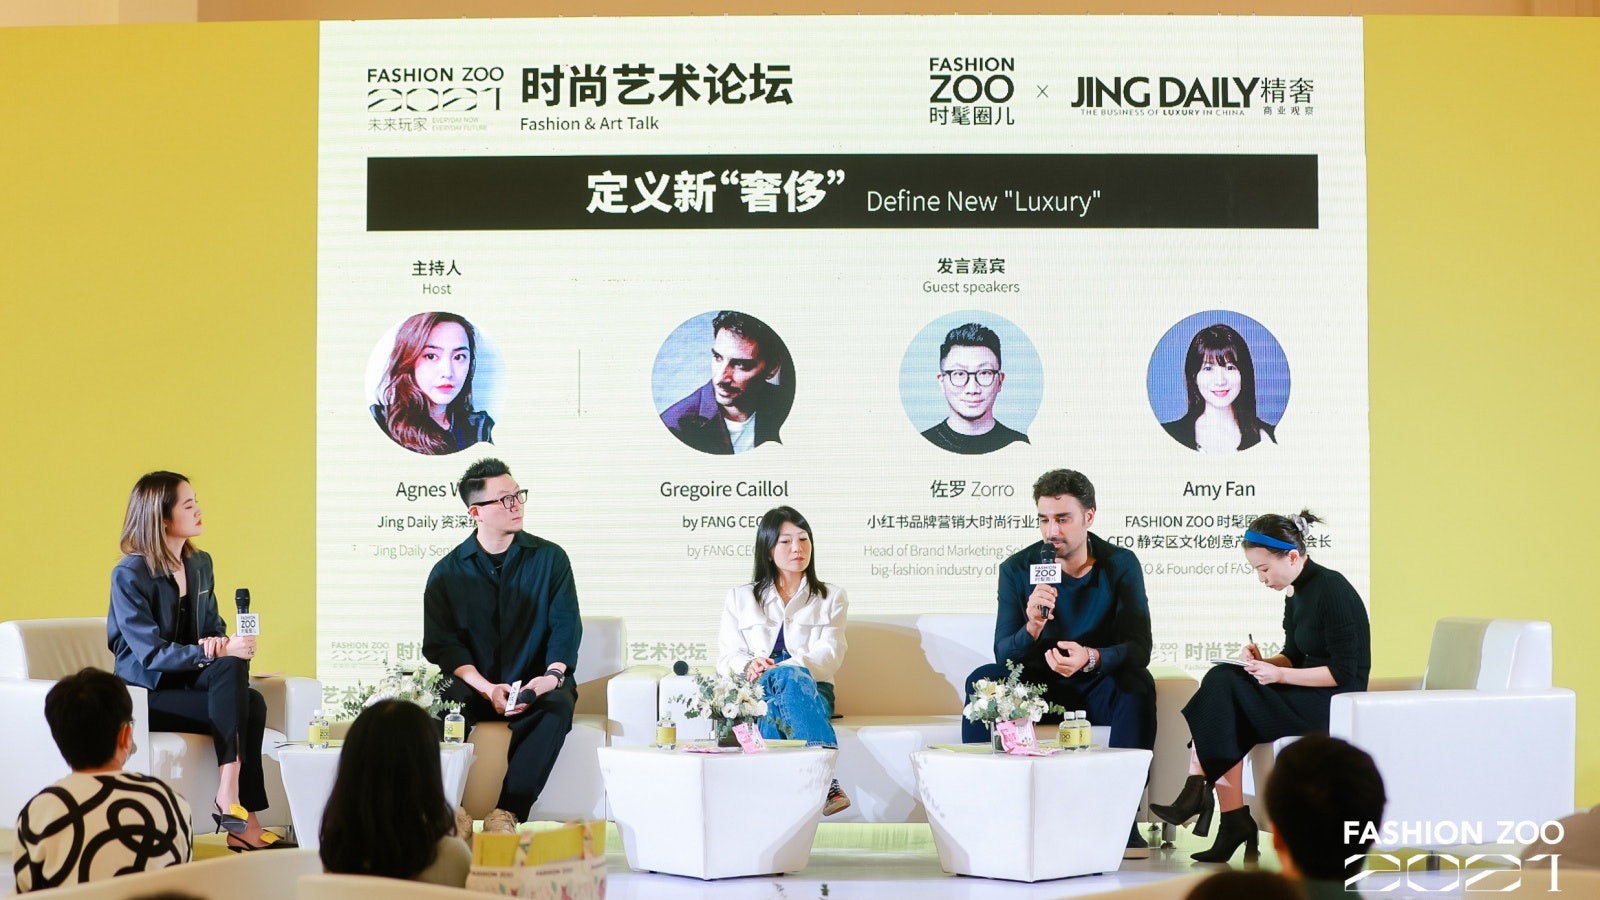 Jing Daily highlights three key takeaways from the Fashion Zoo x Jing Daily panel, which explored the definition of “new luxury” in China’s context. Photo: Fashion Zoo